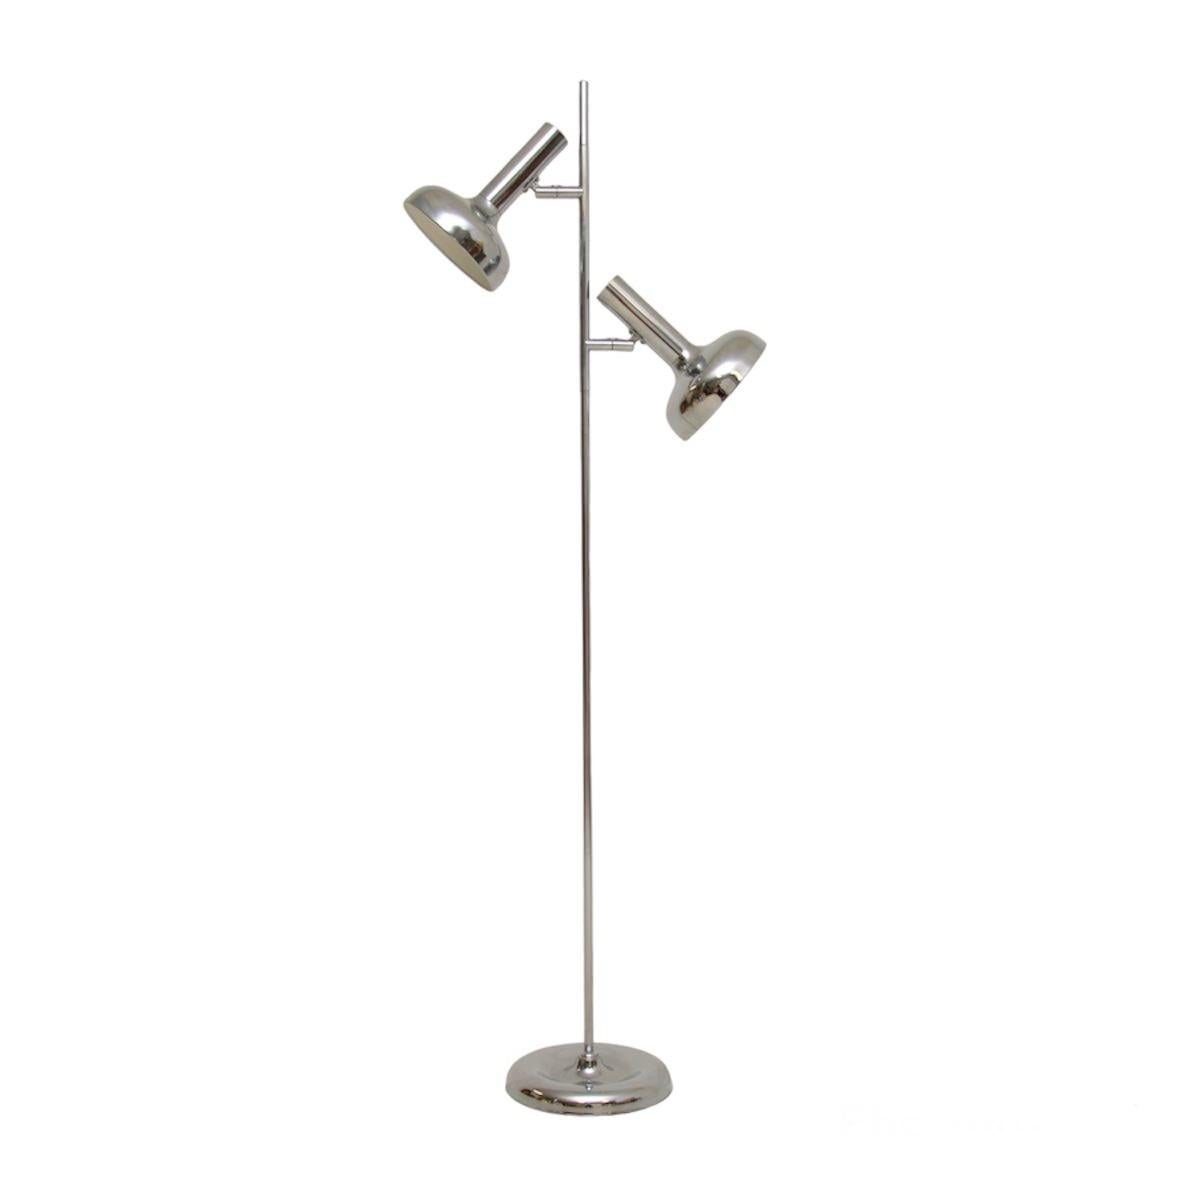 A very stylish and extremely well made vintage French chrome two headed floor lamp. This was made in France and dates from around the 1970’s.

It is of superb quality, with a beautifully made chromed steel frame. The two heads are adjustable, they